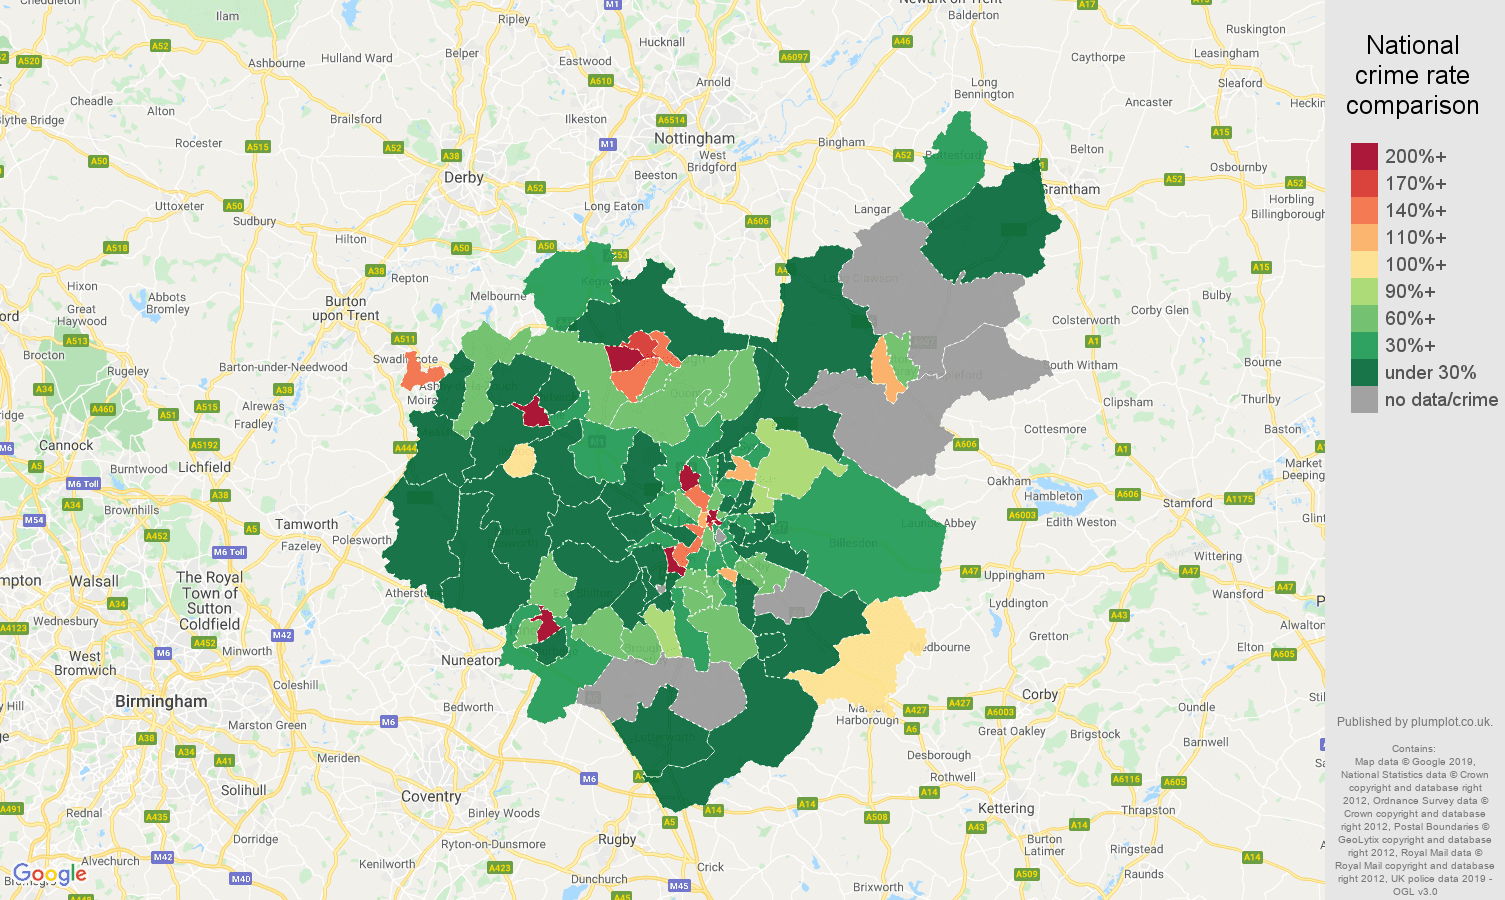 Leicestershire shoplifting crime rate comparison map